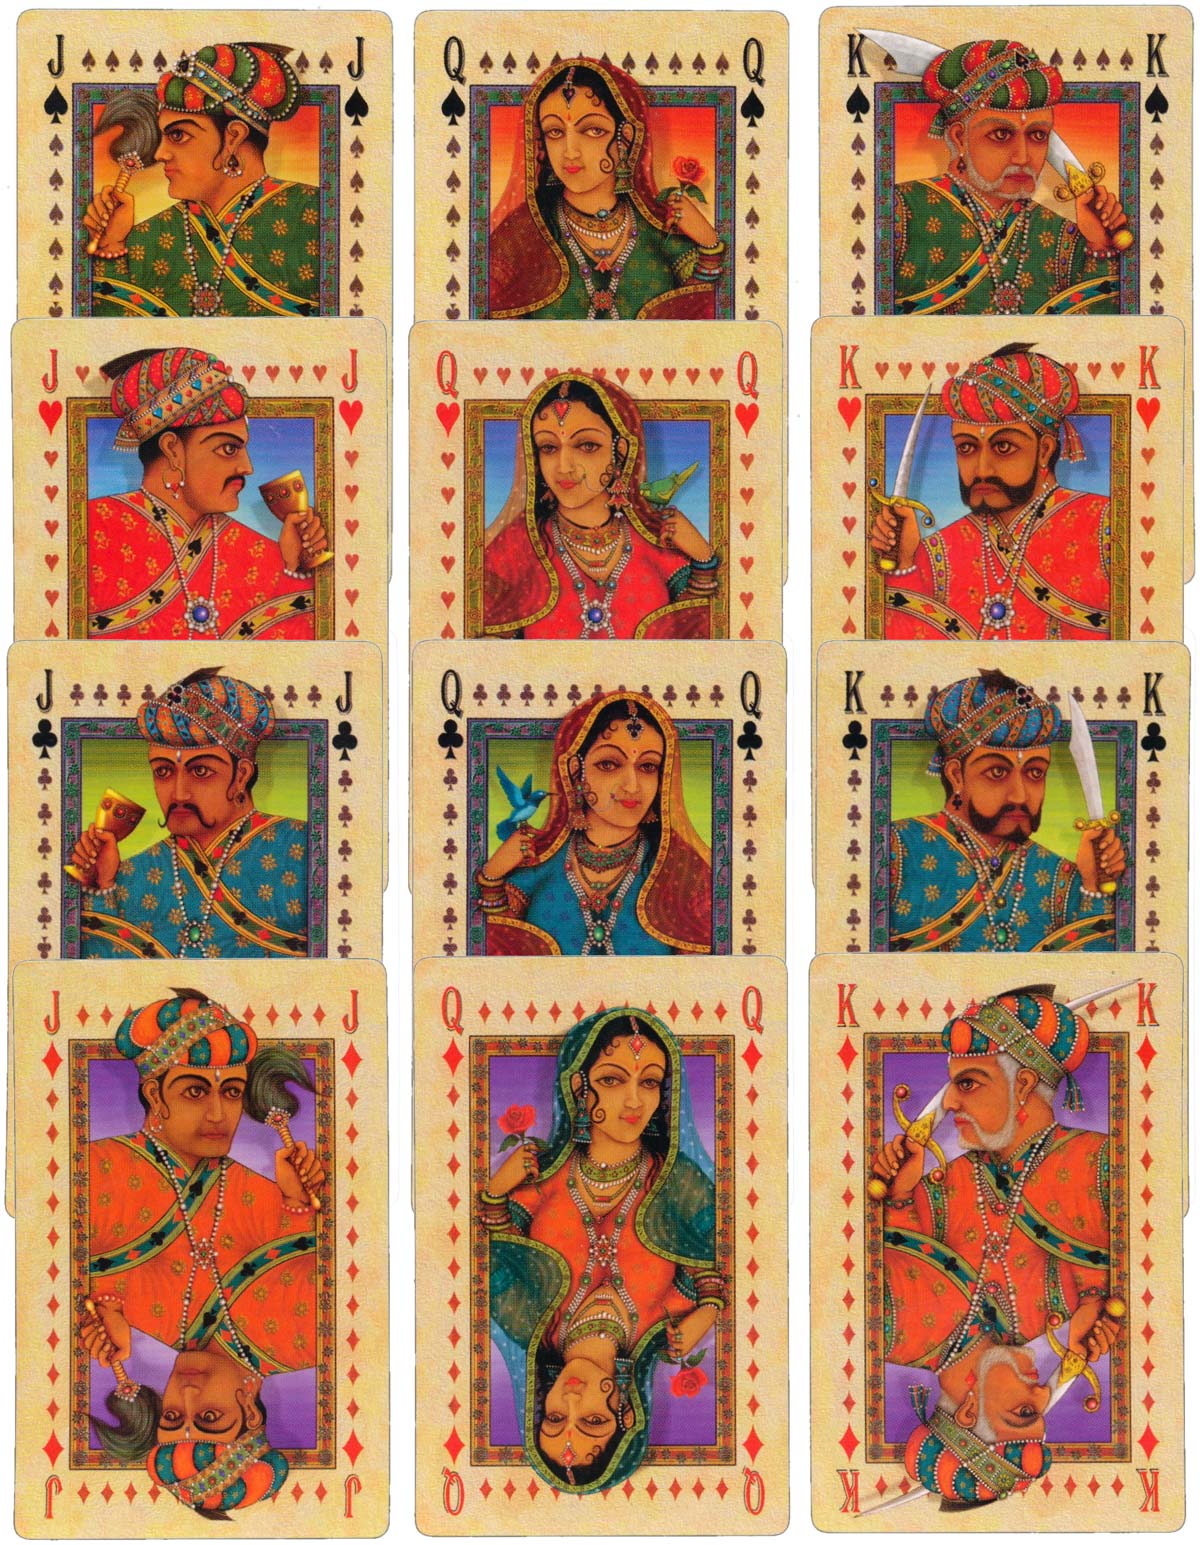 SiRen International playing cards based on traditional style of Indian miniature painting, 1998